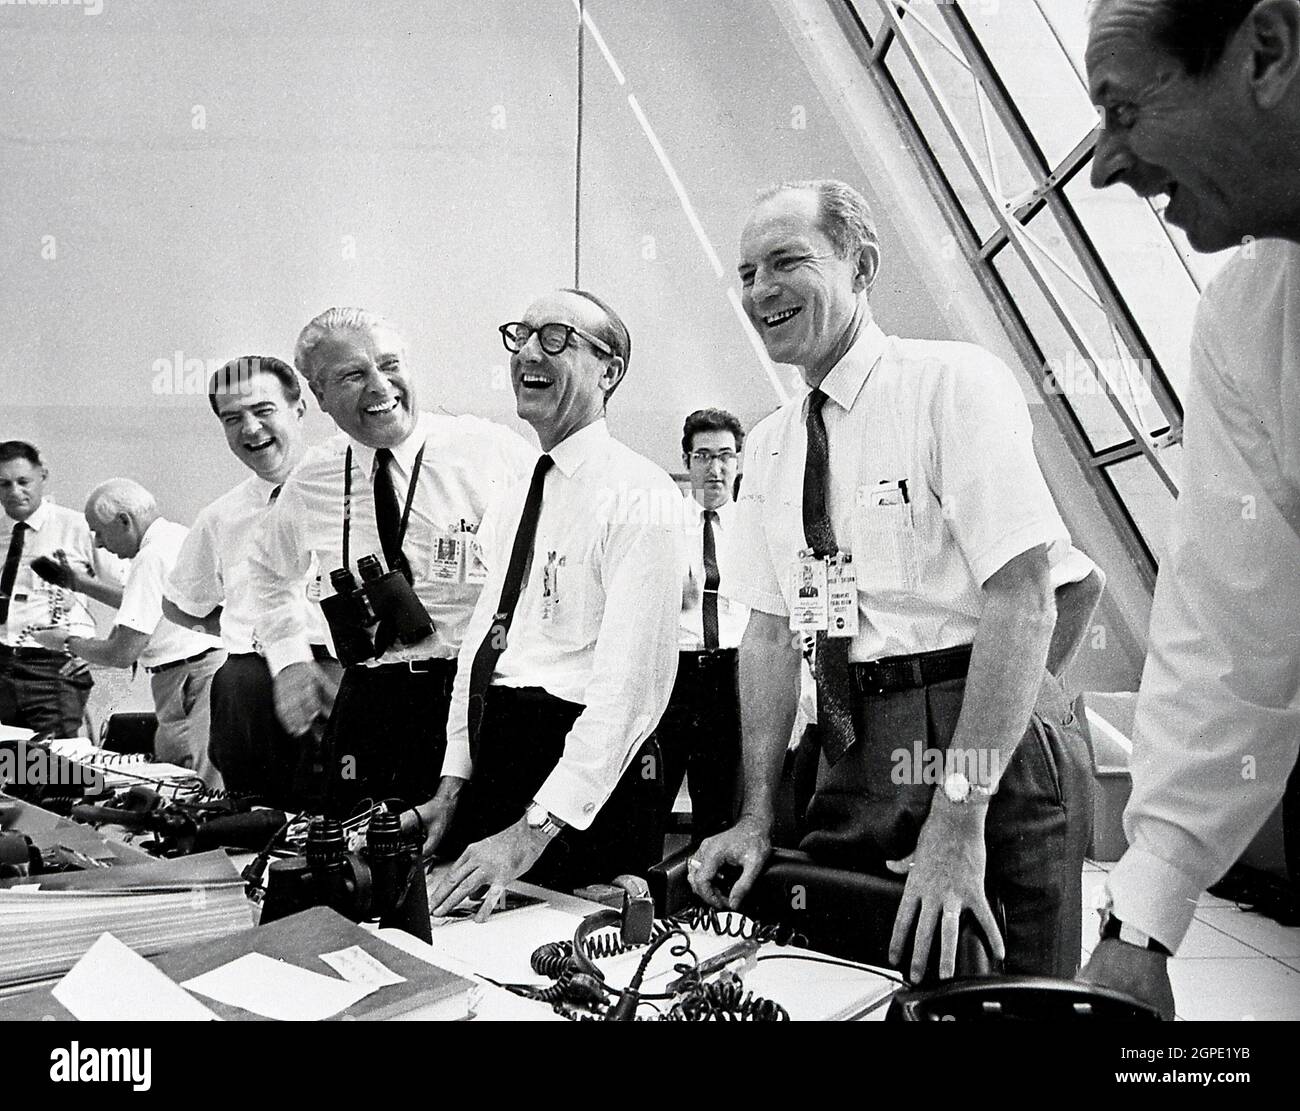 7/16/69 Mission Officials (Including Dr,Von Braun) Relax in the Launch Control Center Following the Successful Apollo 11 Liftoff 69-H-1159, NASA officials, (left to right) Charles W. Mathews; Dr. Wernher von Braun, Director, Marshall Space Flight Center (MSFC); Dr. George E. Mueller, Associate Administrator for Marned Space Flight; and Air Force Lt. General Samuel C. Phillips, Apollo Program Director celebrate the successful launch of Apollo 11 in the control room at Kennedy Space Center (KSC) on July 16, 1969. Boosted by the Saturn V launch vehicle, the Apollo 11 mission with a crew of three: Stock Photo